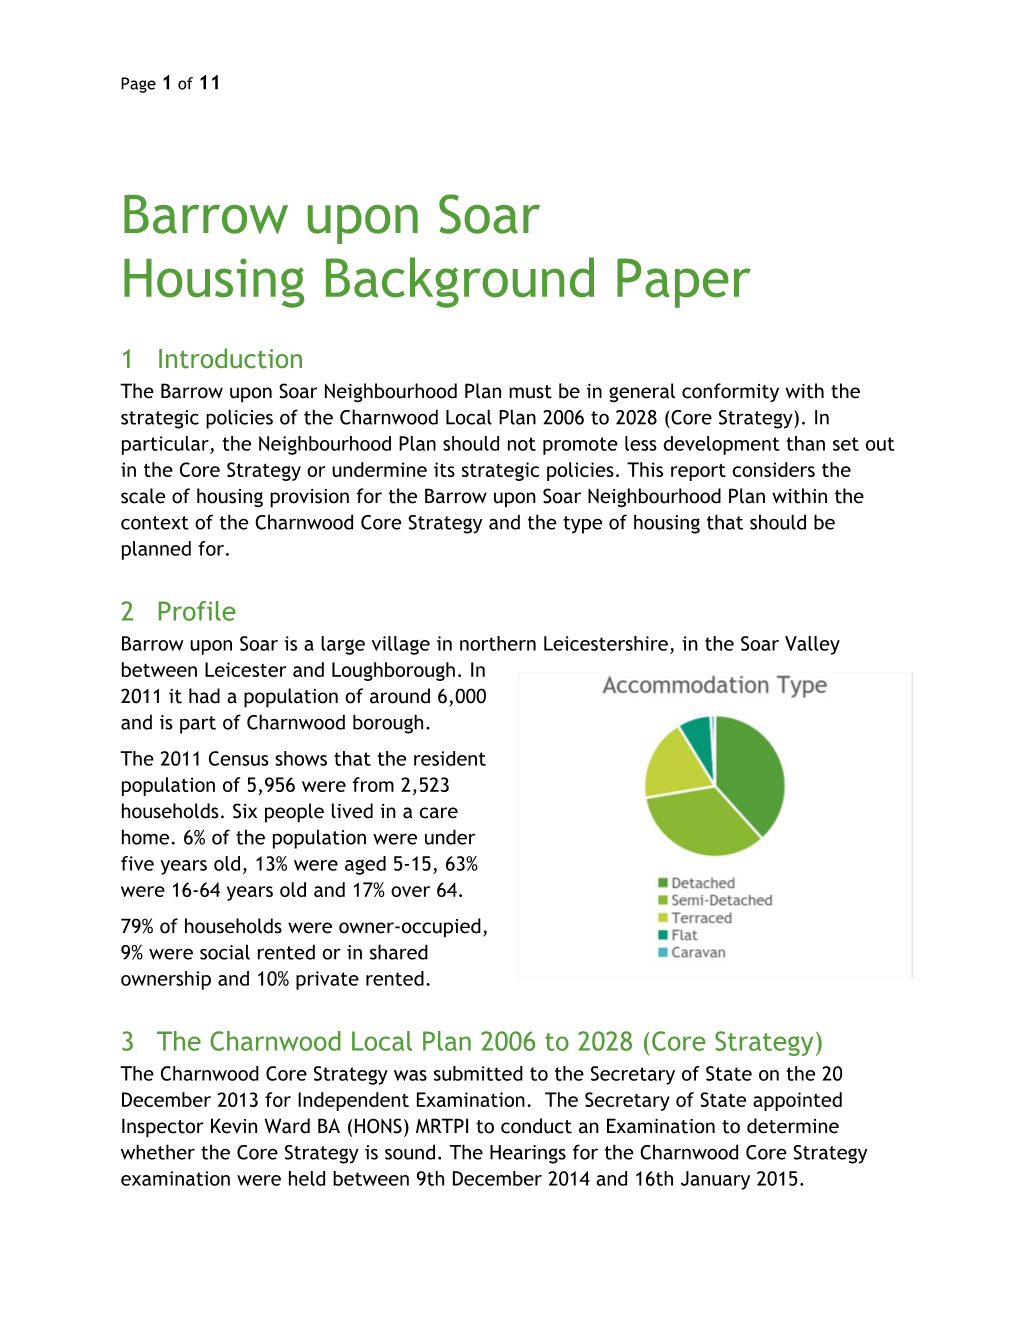 Barrow Upon Soar Housing Background Paper